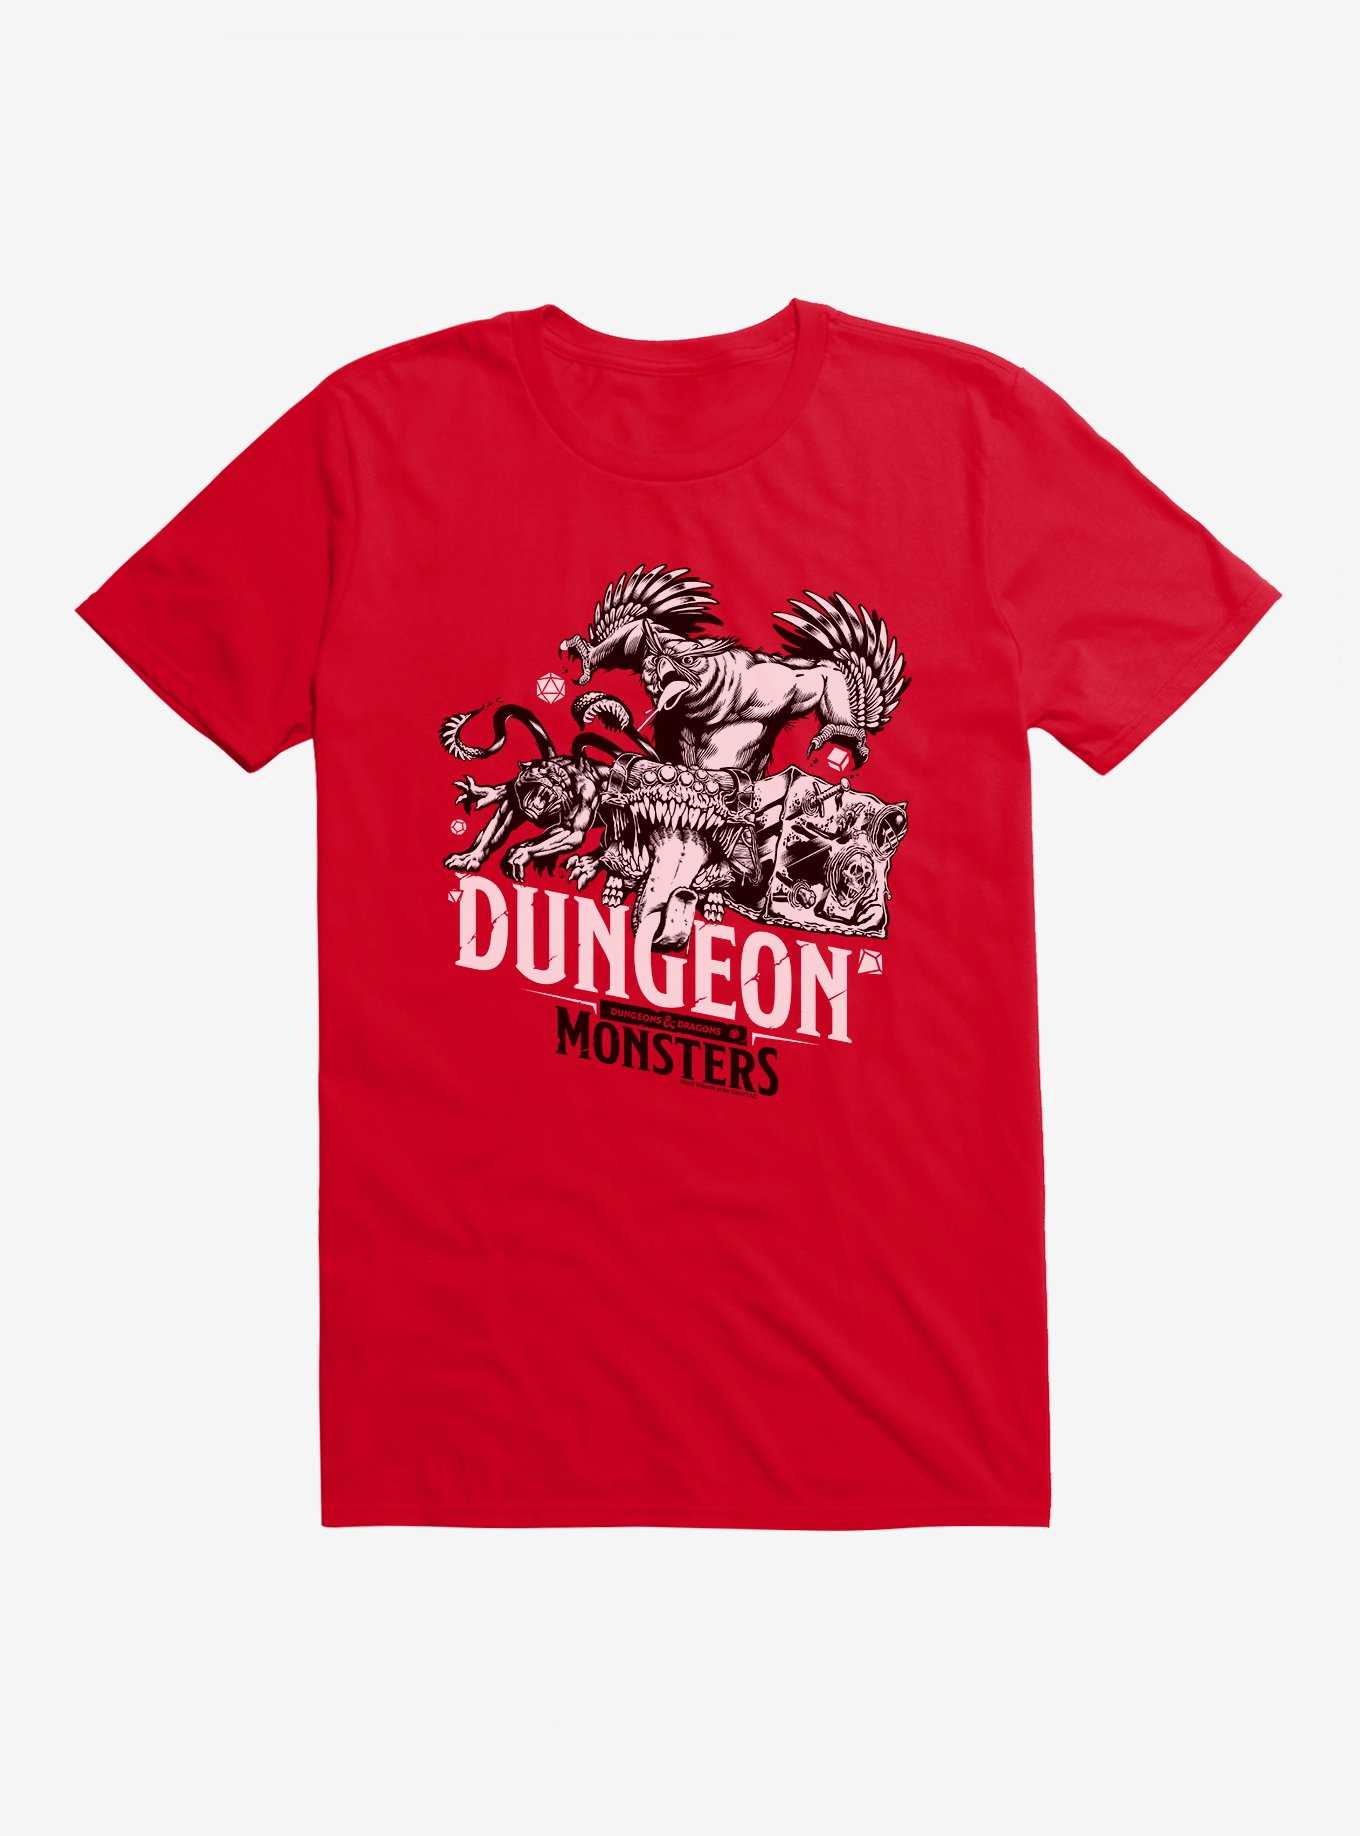 Dungeons & Dragons Monsters Group T-Shirt, , hi-res